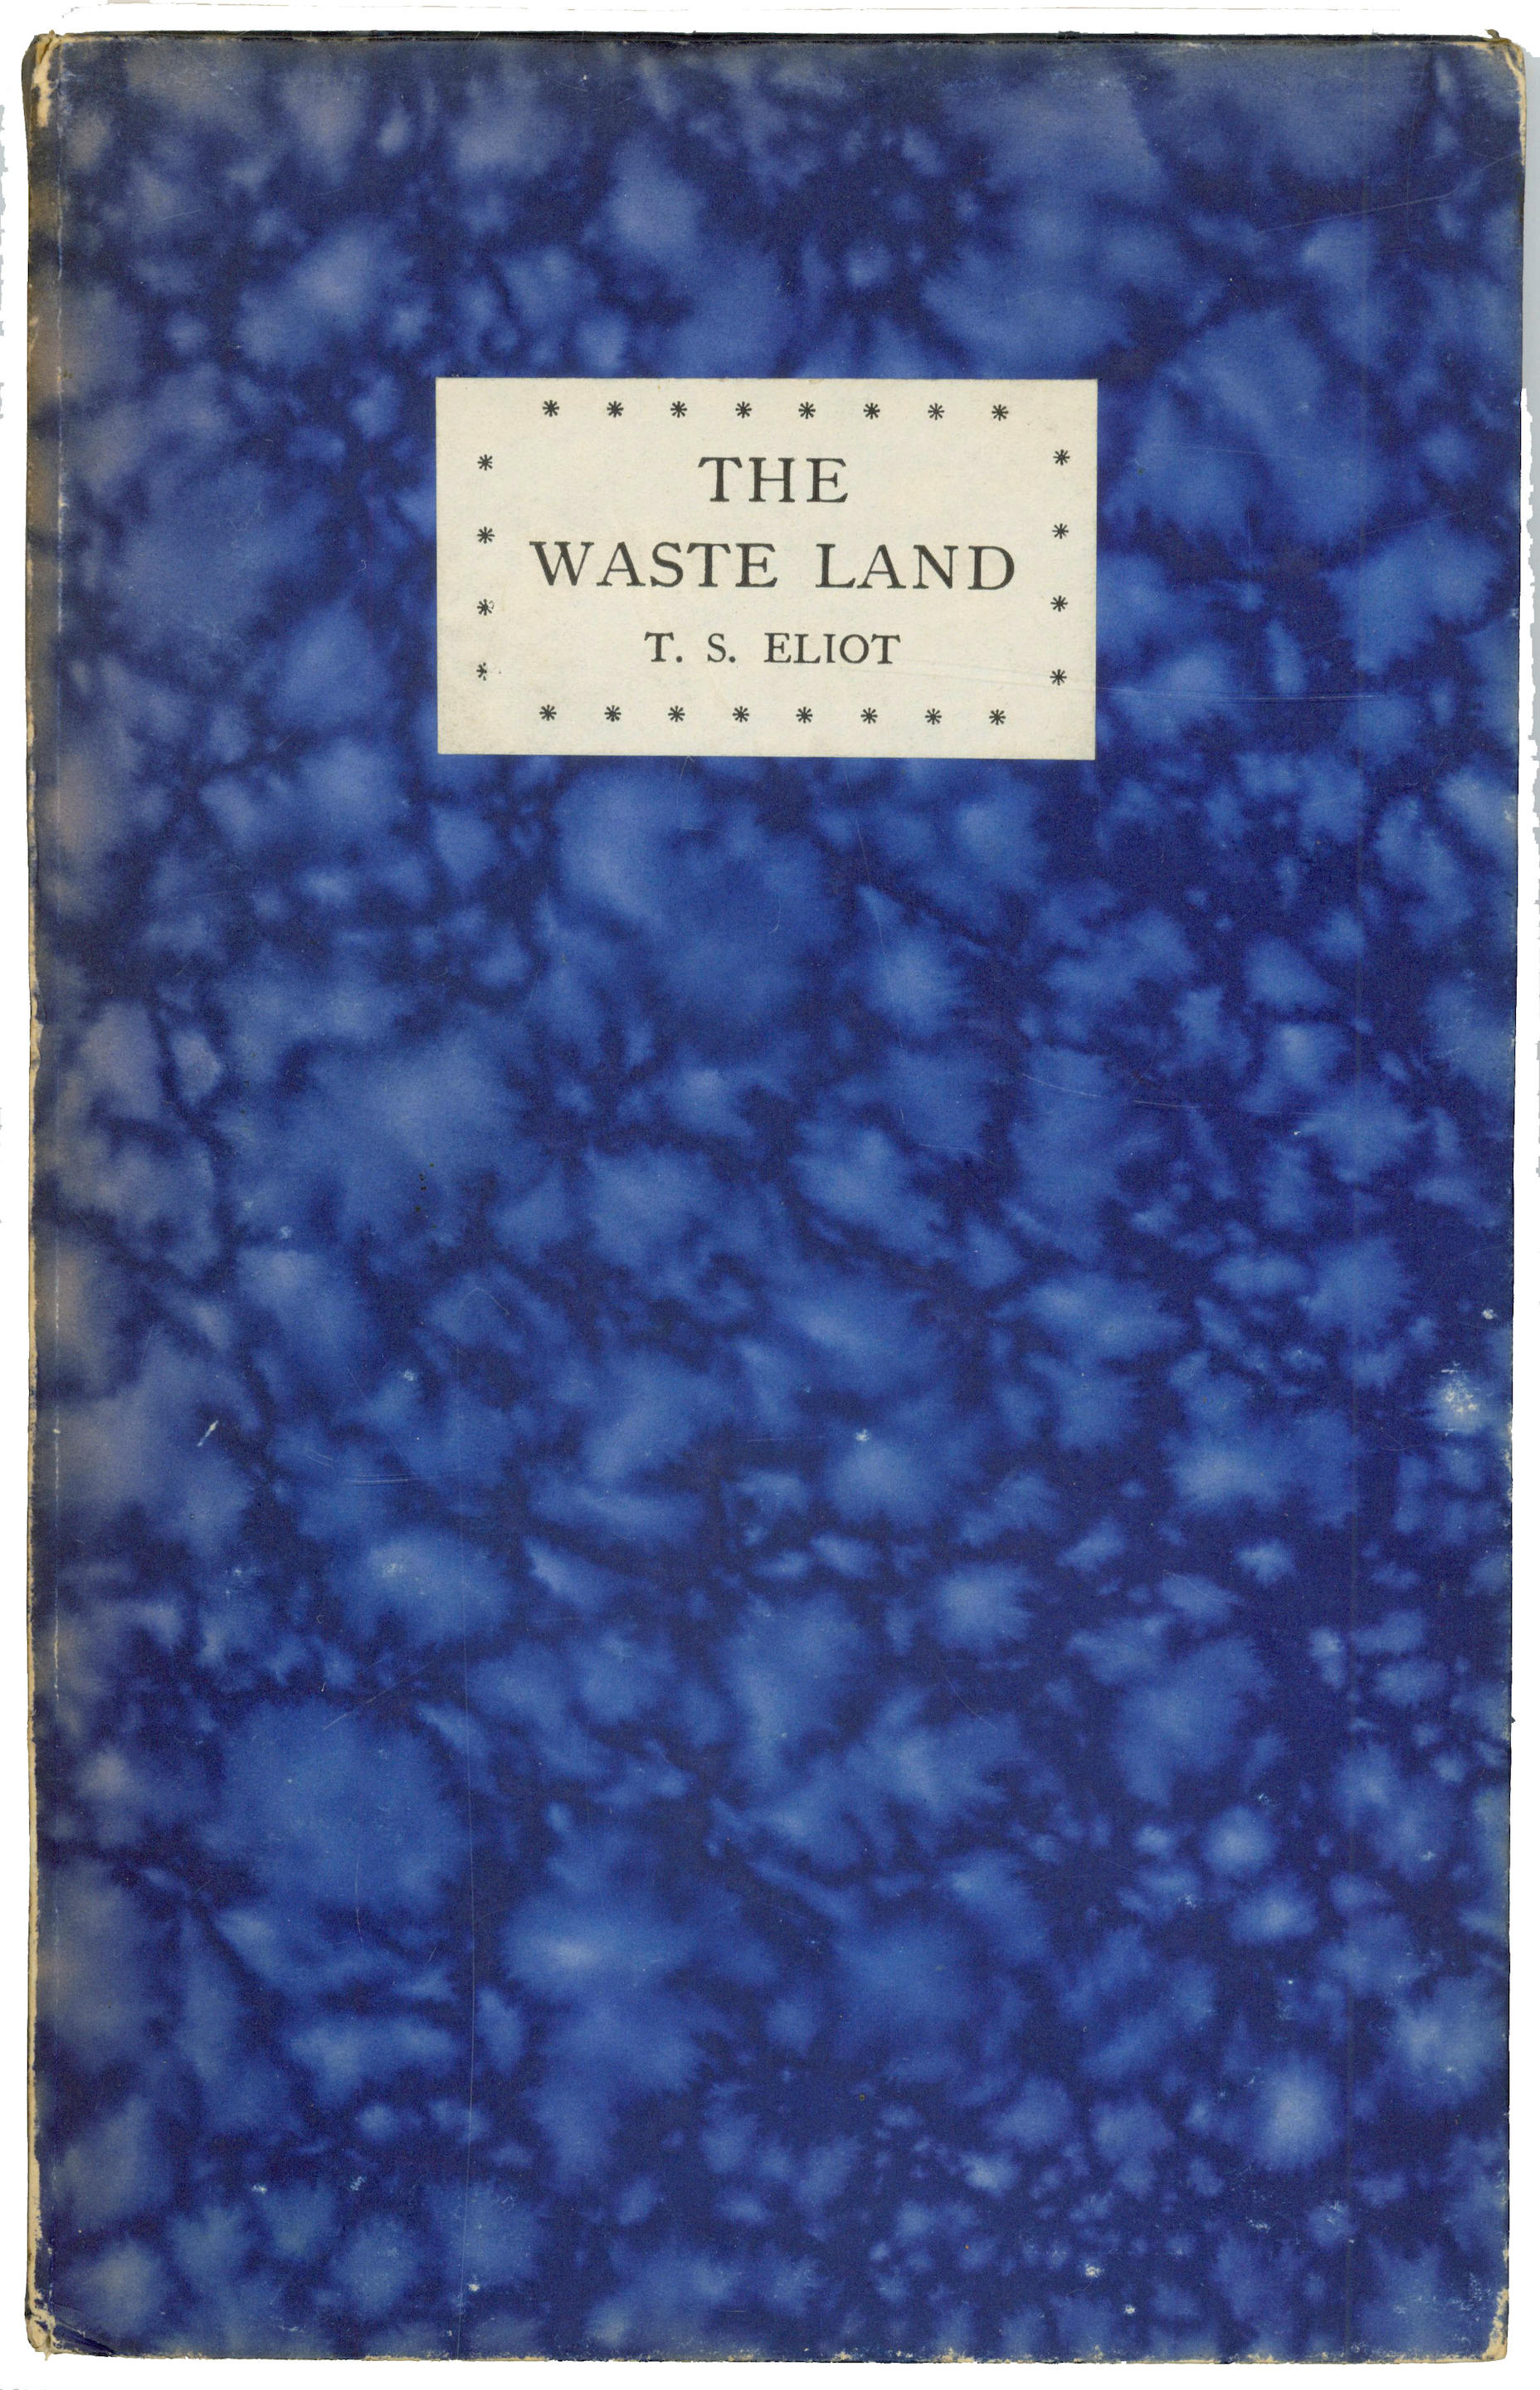 eliot after the waste land